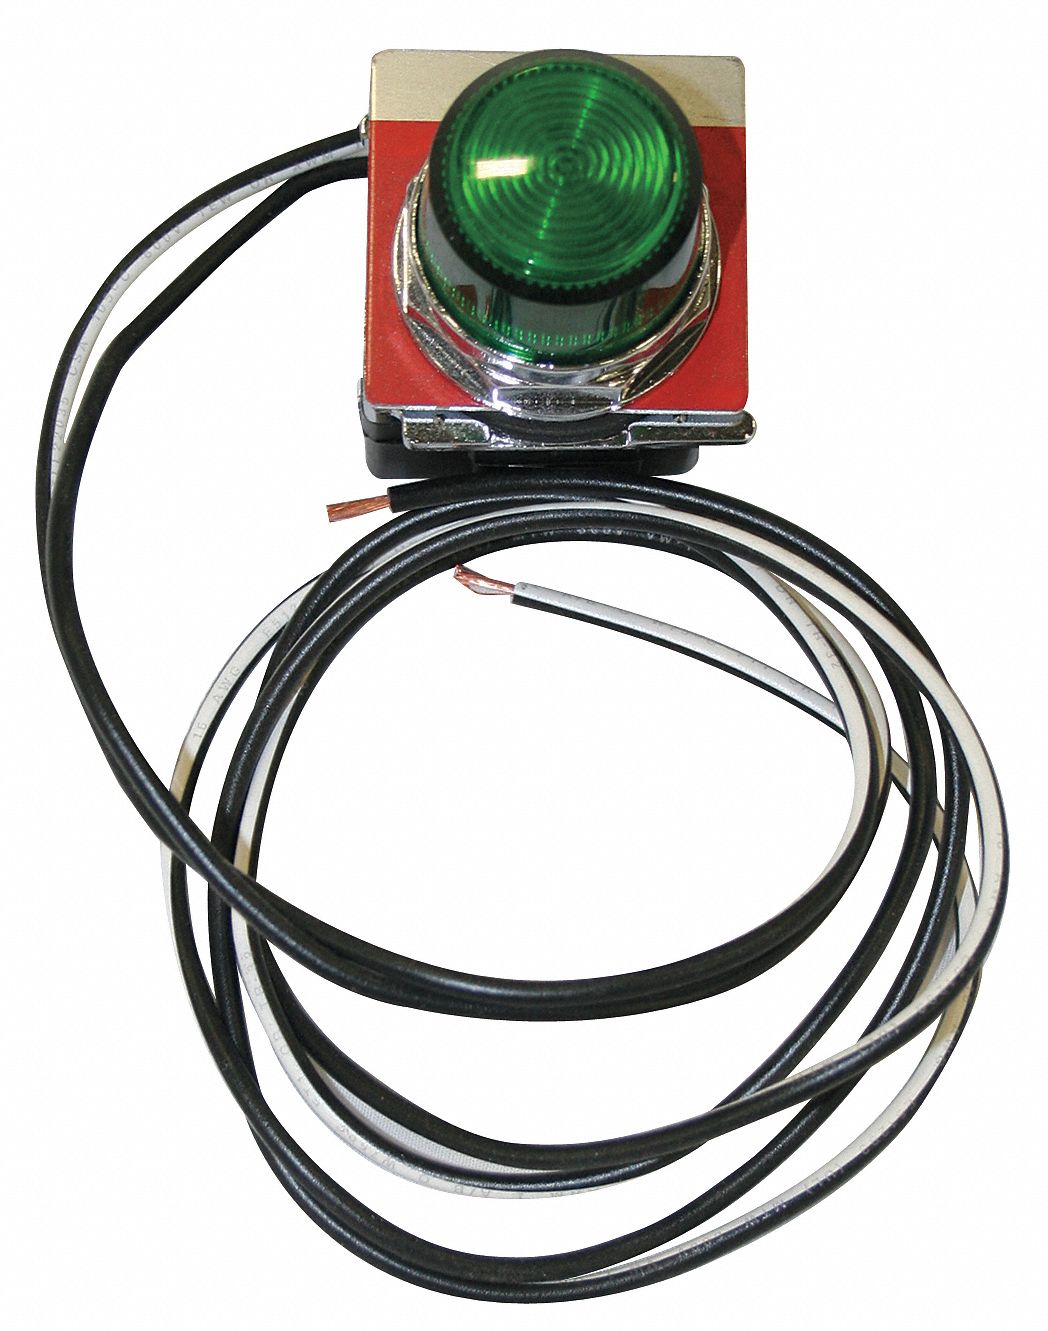 Push Button Kit, NEMA Rating: 1,3R,4x,12, For Use With Type 1, 3R, 4X, and 12 Enclosed Starters